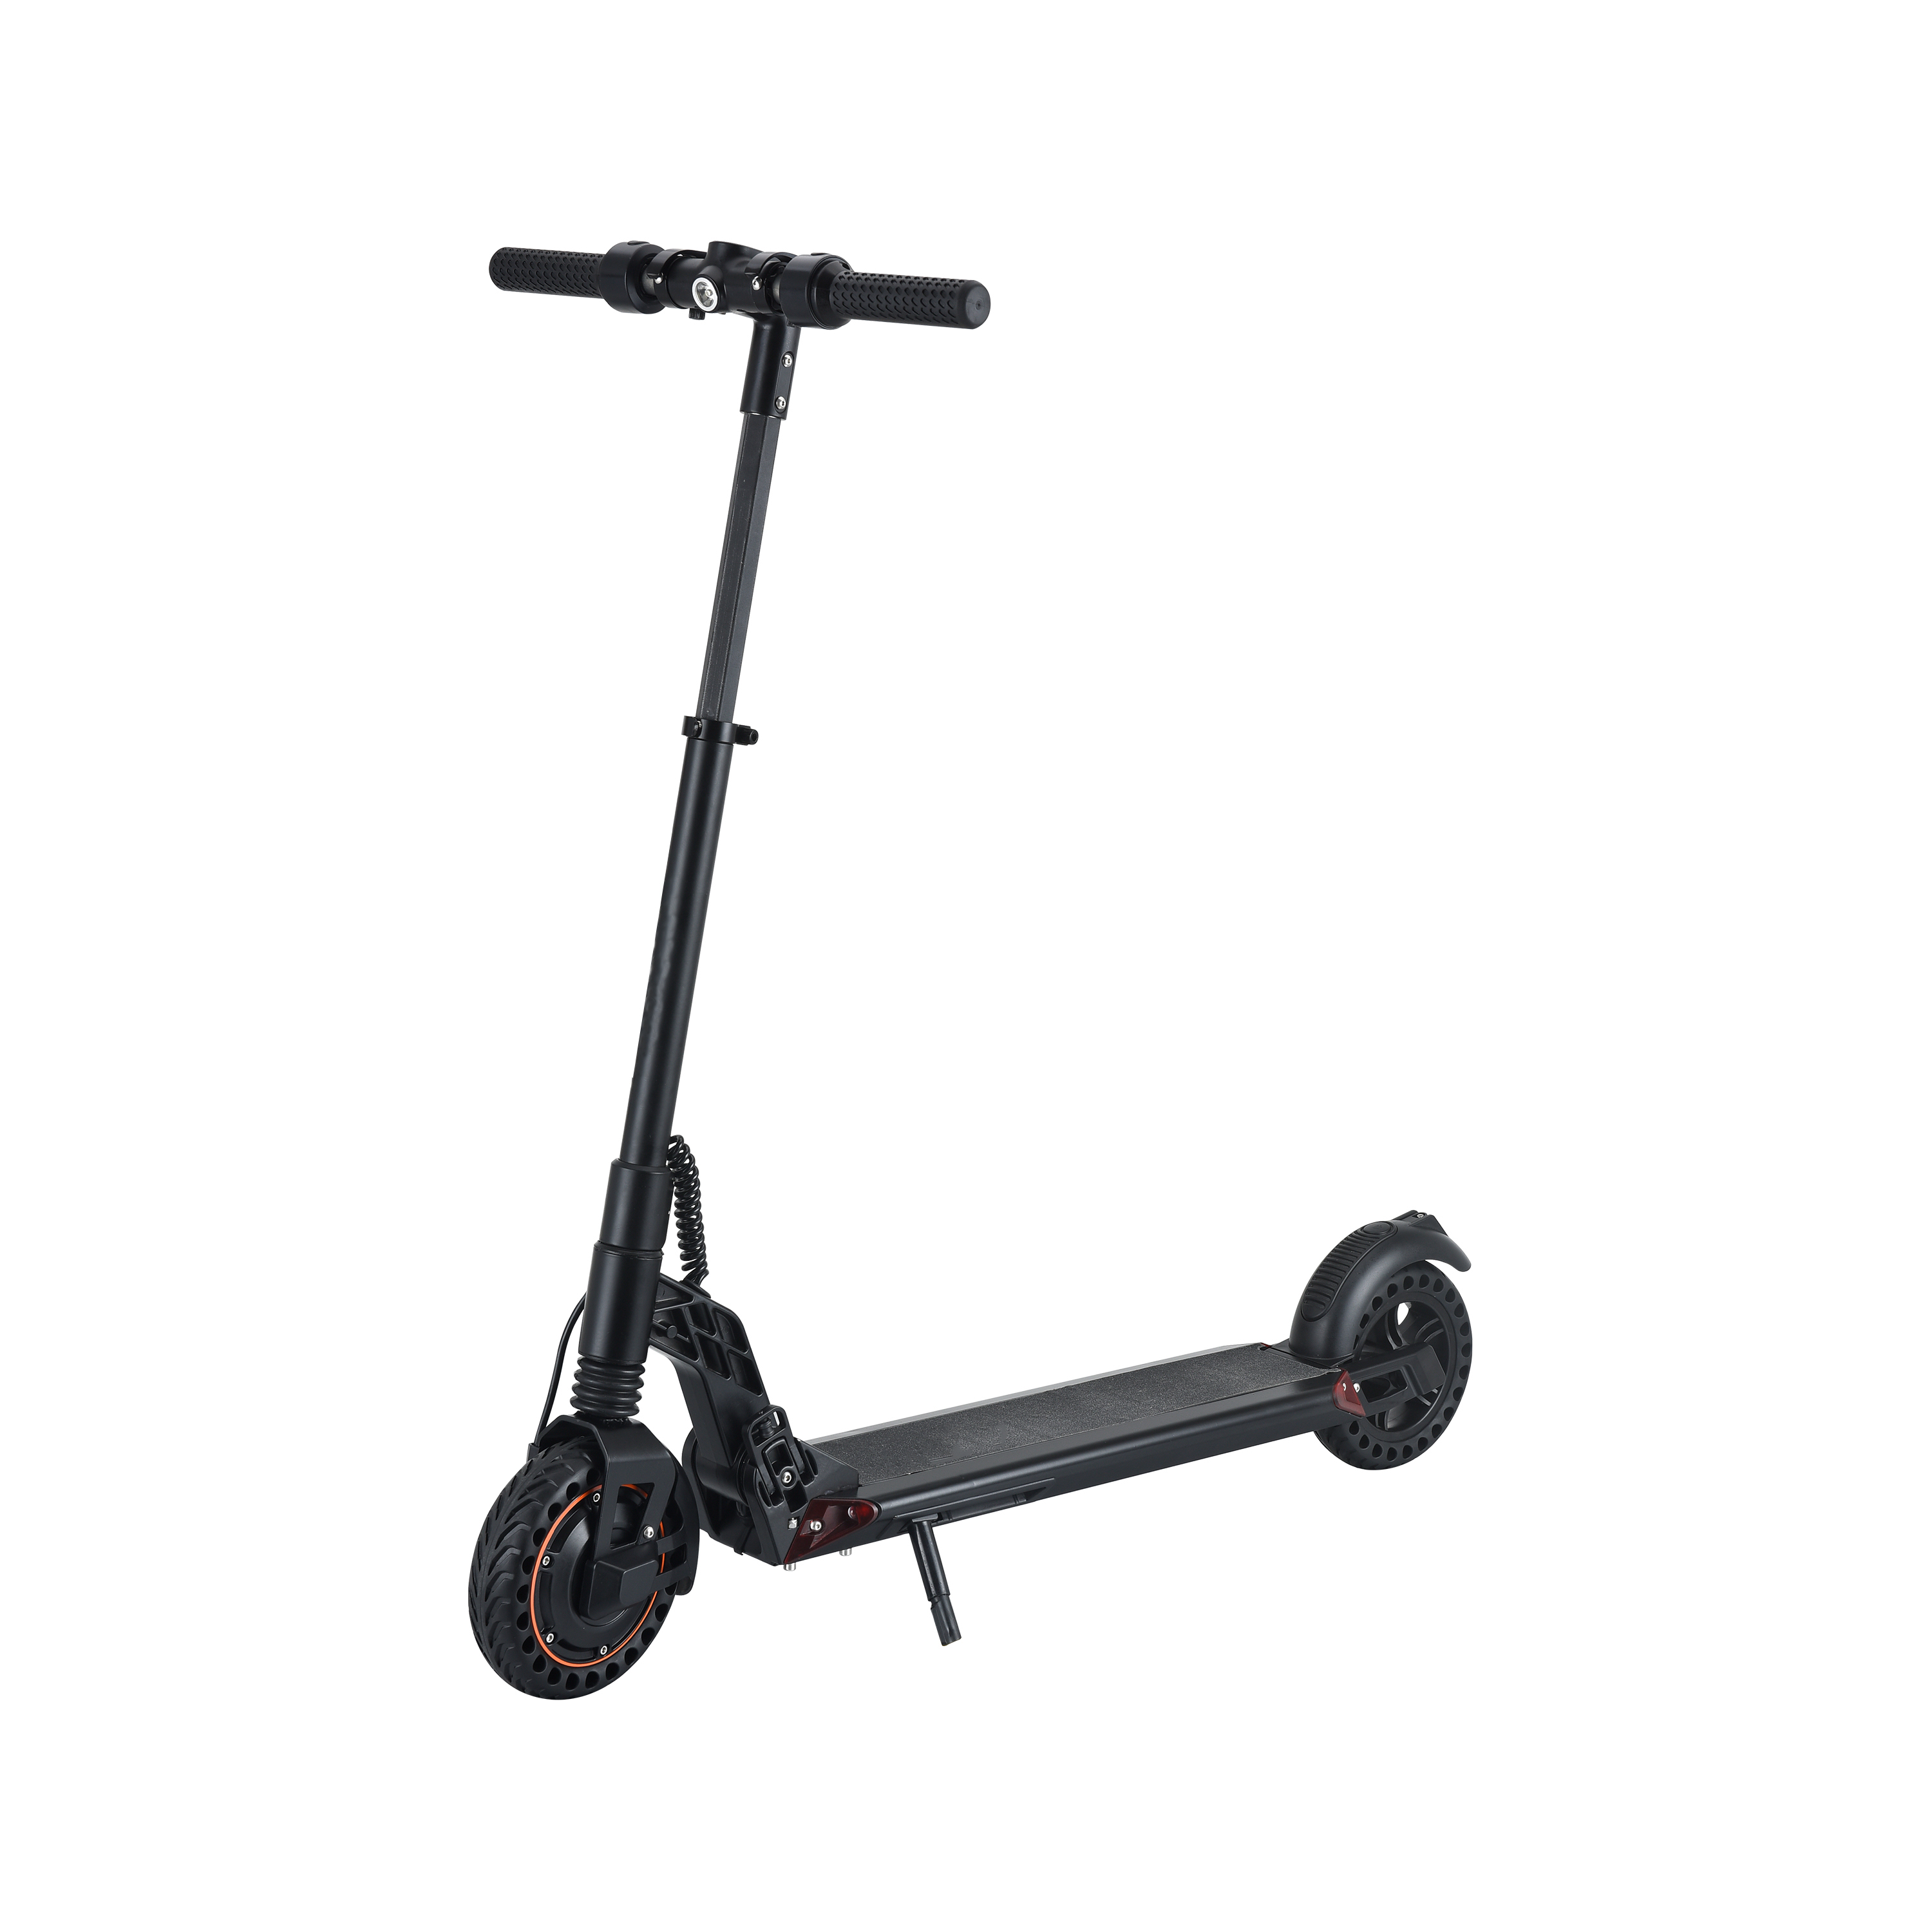 KUGOO S1 electric scooter 